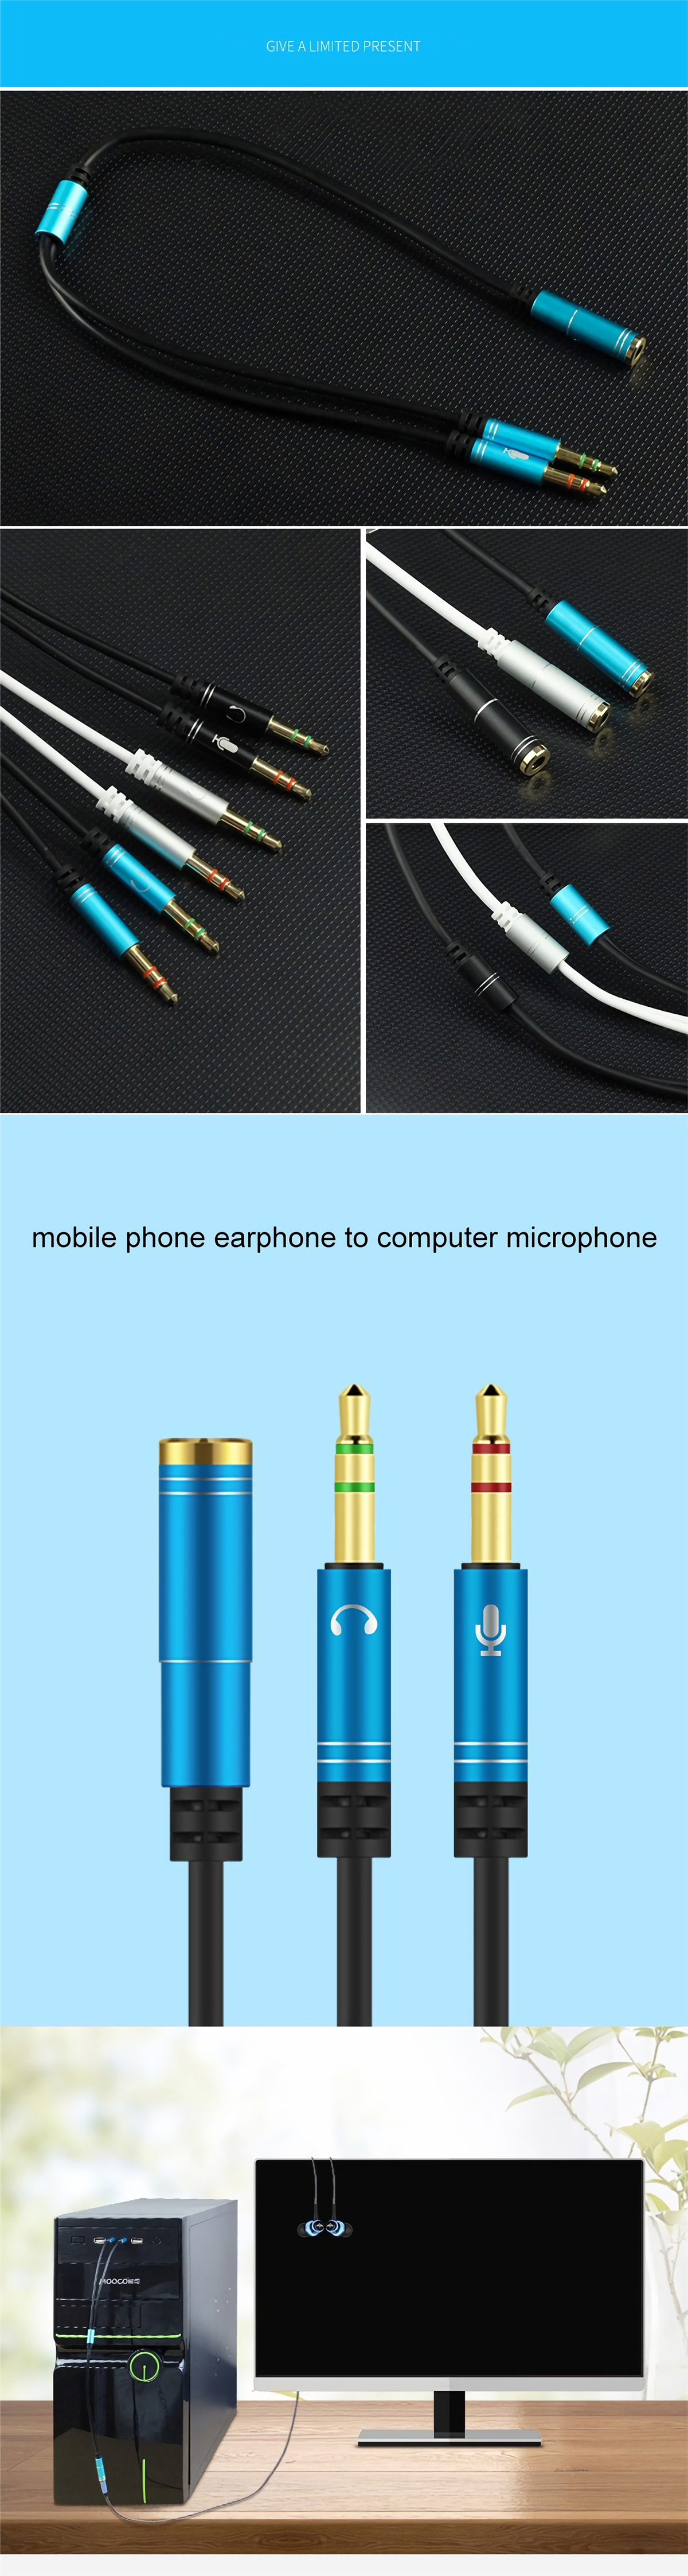 SONGFUL 3.5mm Earphone Headset Splitter Cable Stereo 3.5mm Female to 2 * 3.5mm Male Computer Microphone Audio Conversion Cable for Computer Laptop PC Speaker Amplifier